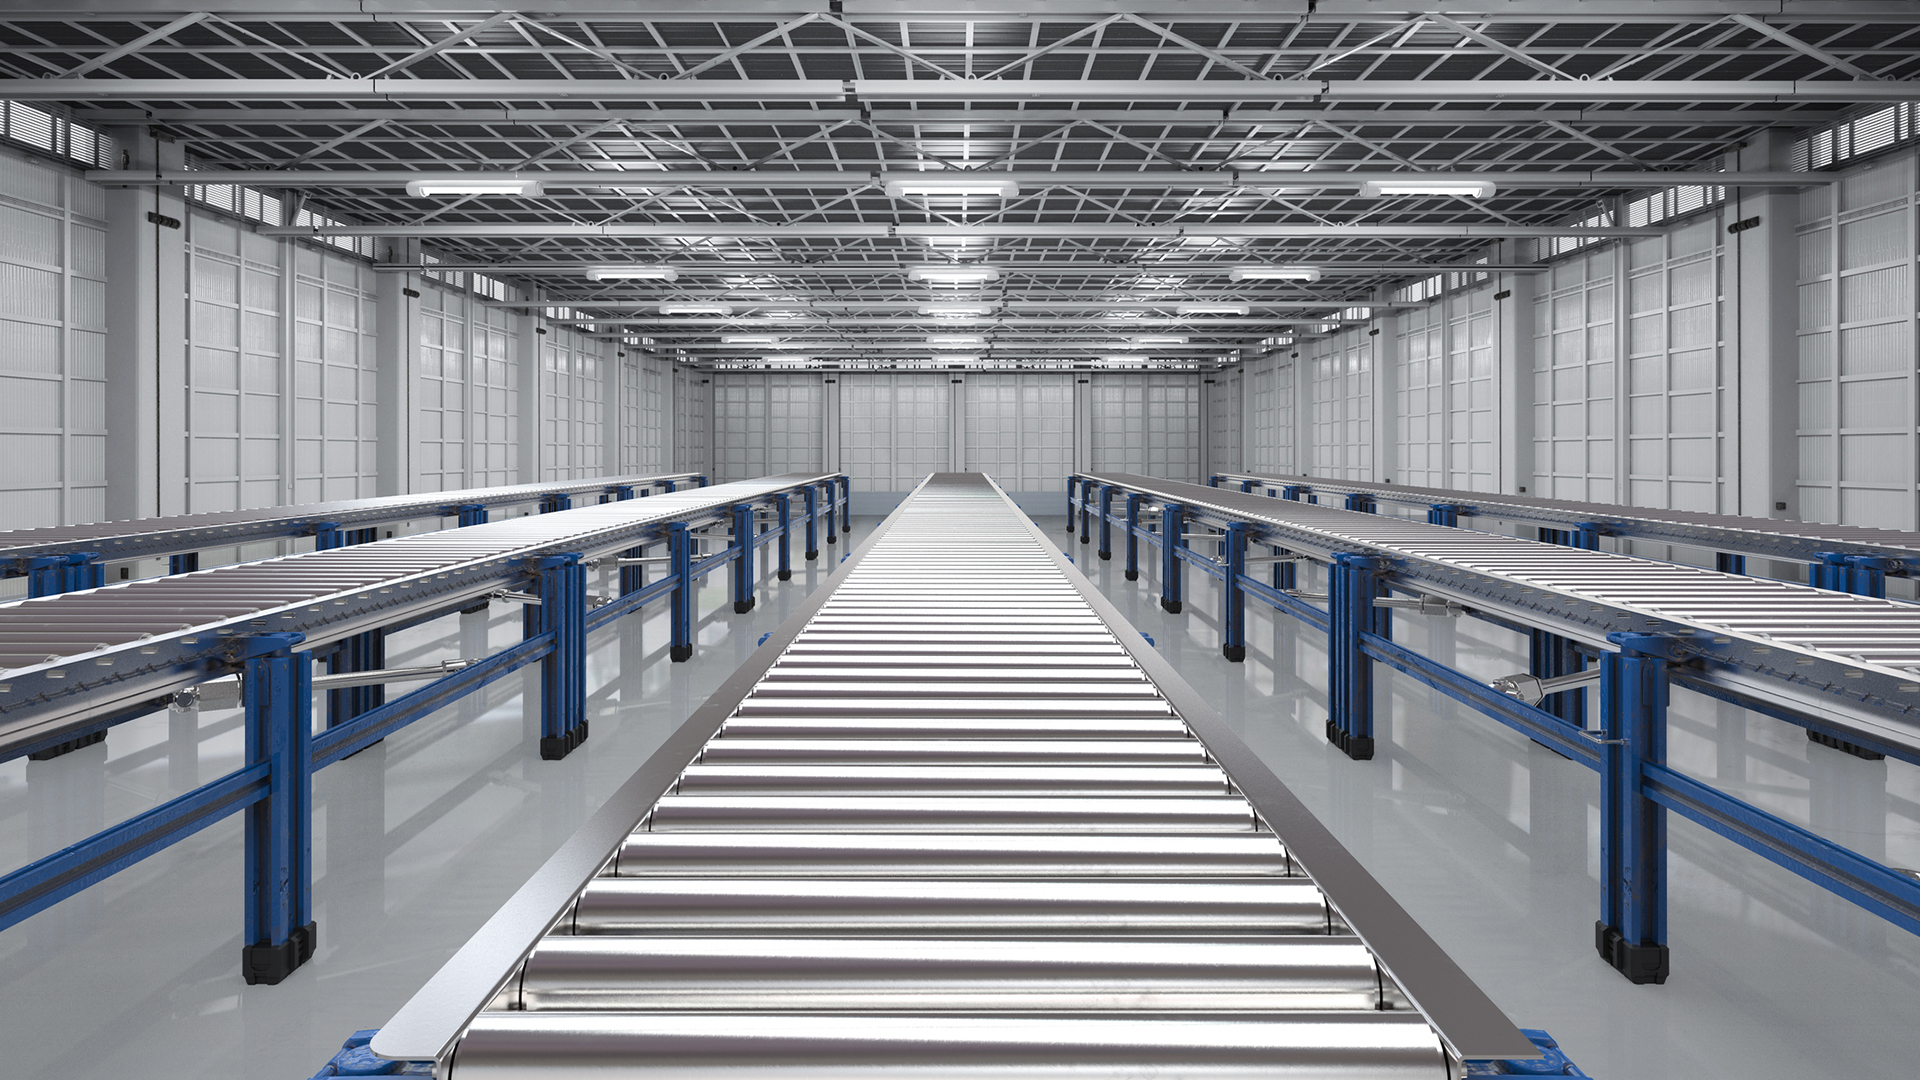 We design waste sorting lines and other custom solutions